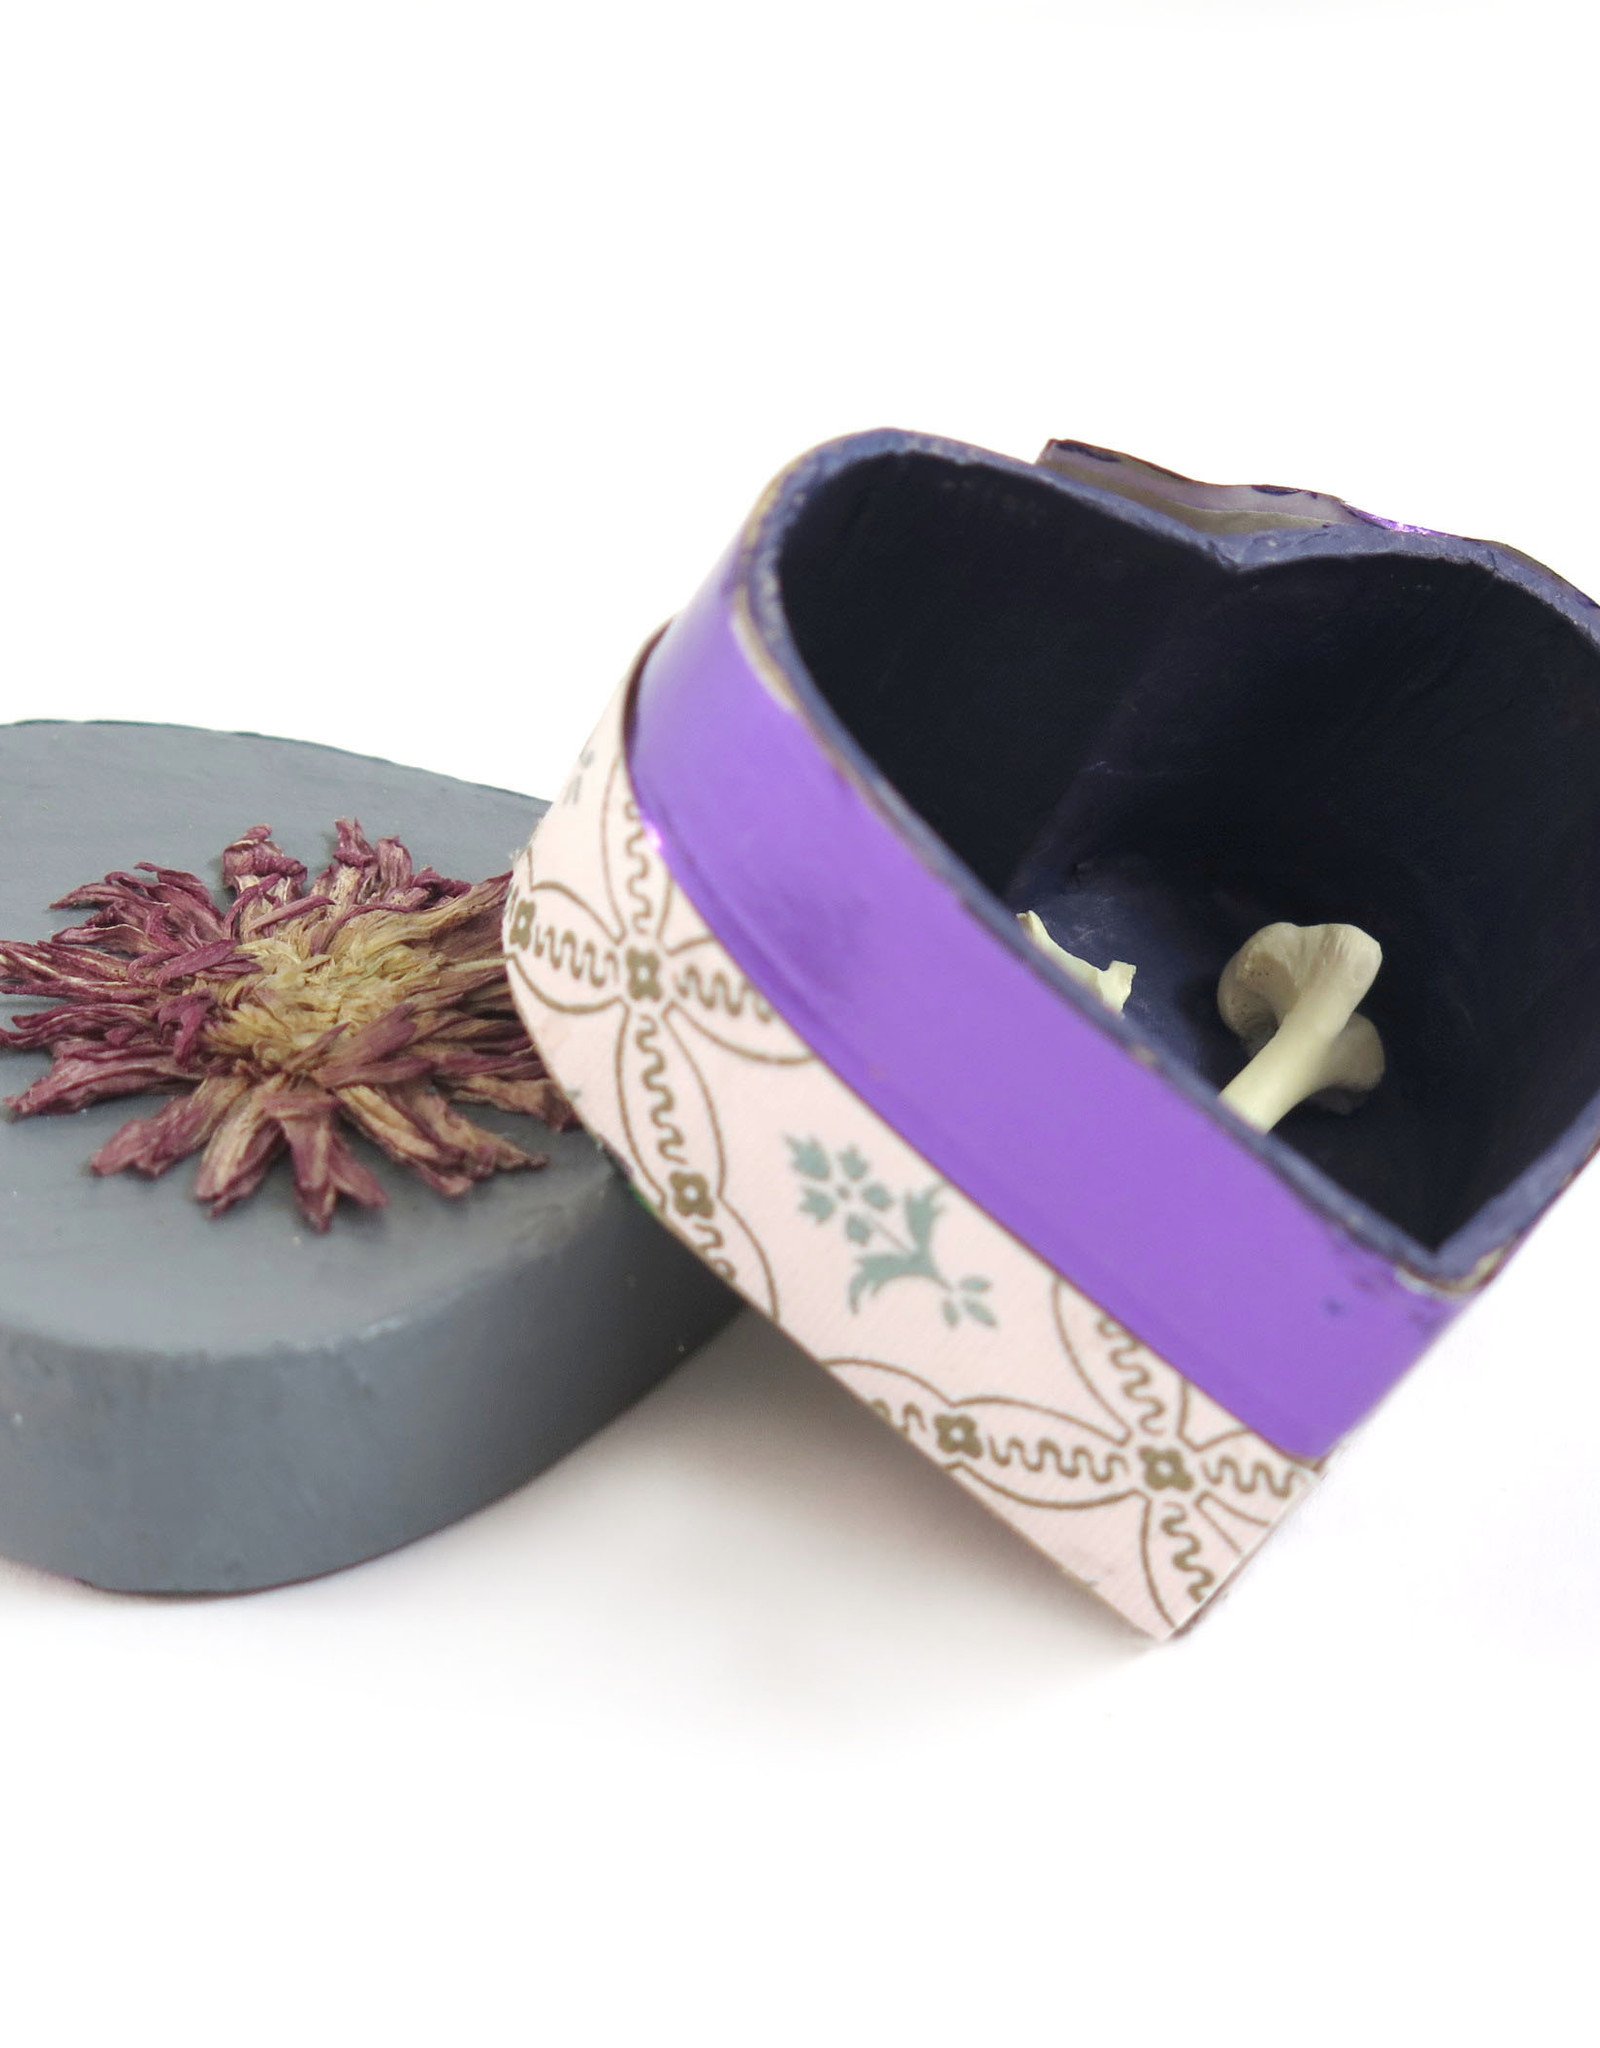 Flower and Bone Heart Box by Spooky Spectacles